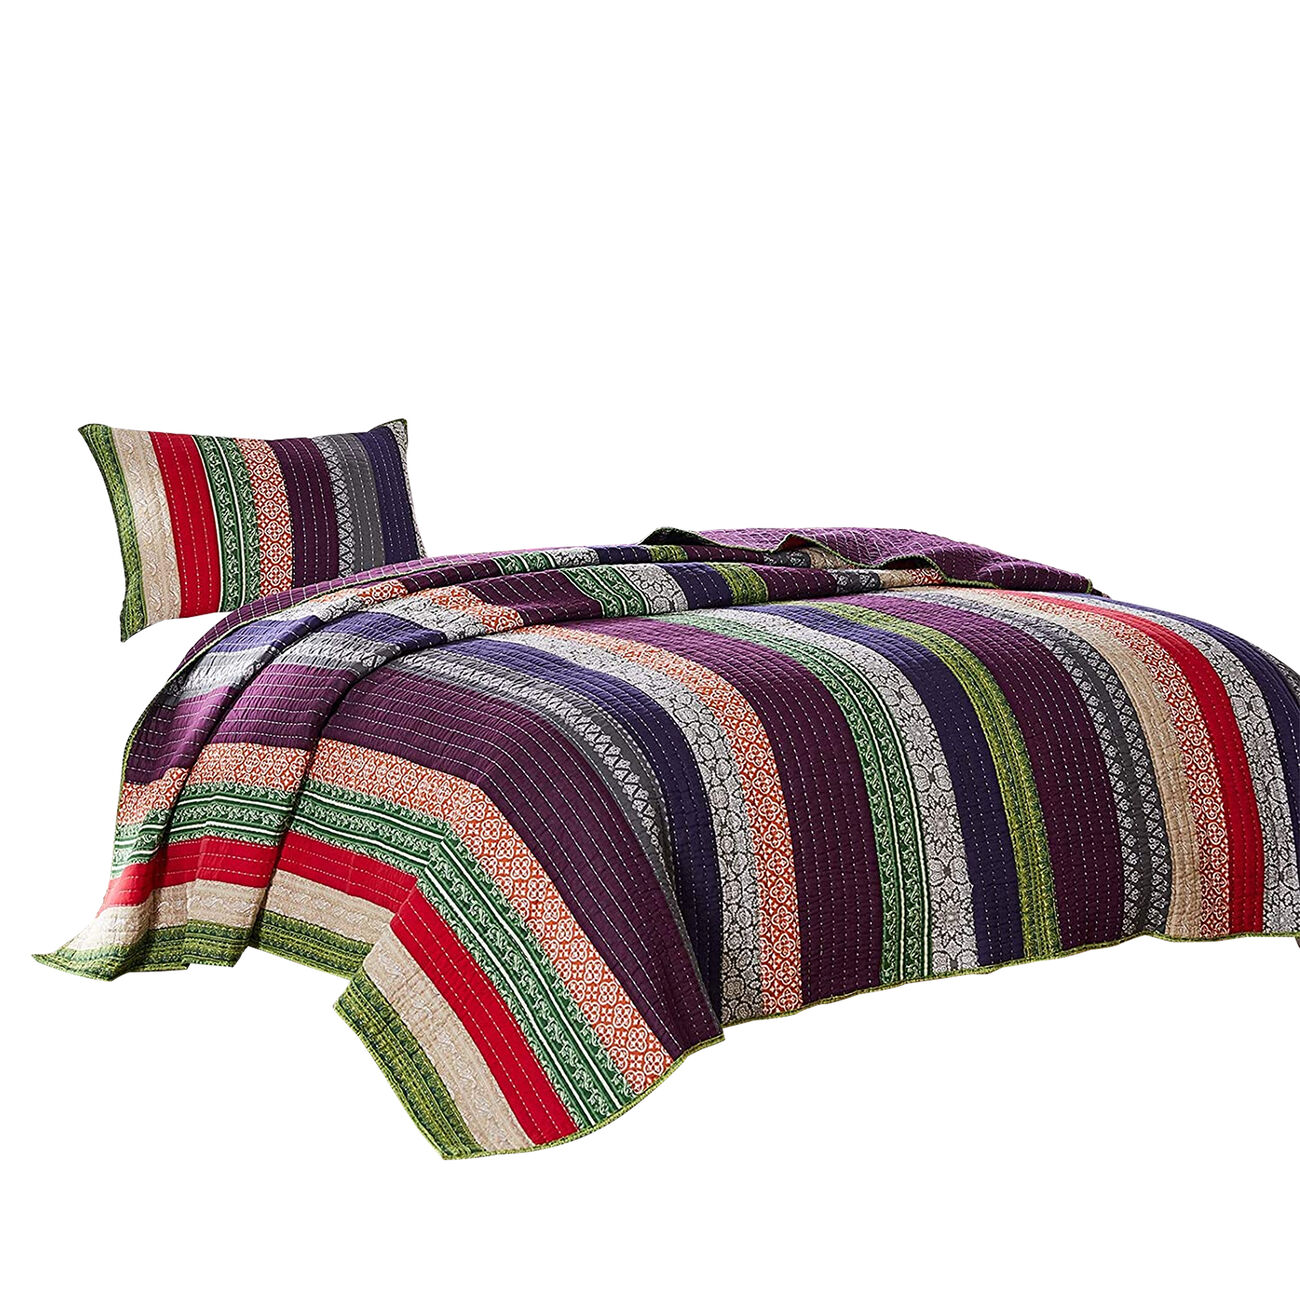 Rhine 2 Piece Textured Twin Size Quilt Set with Fabric Bound Edges, Multicolor